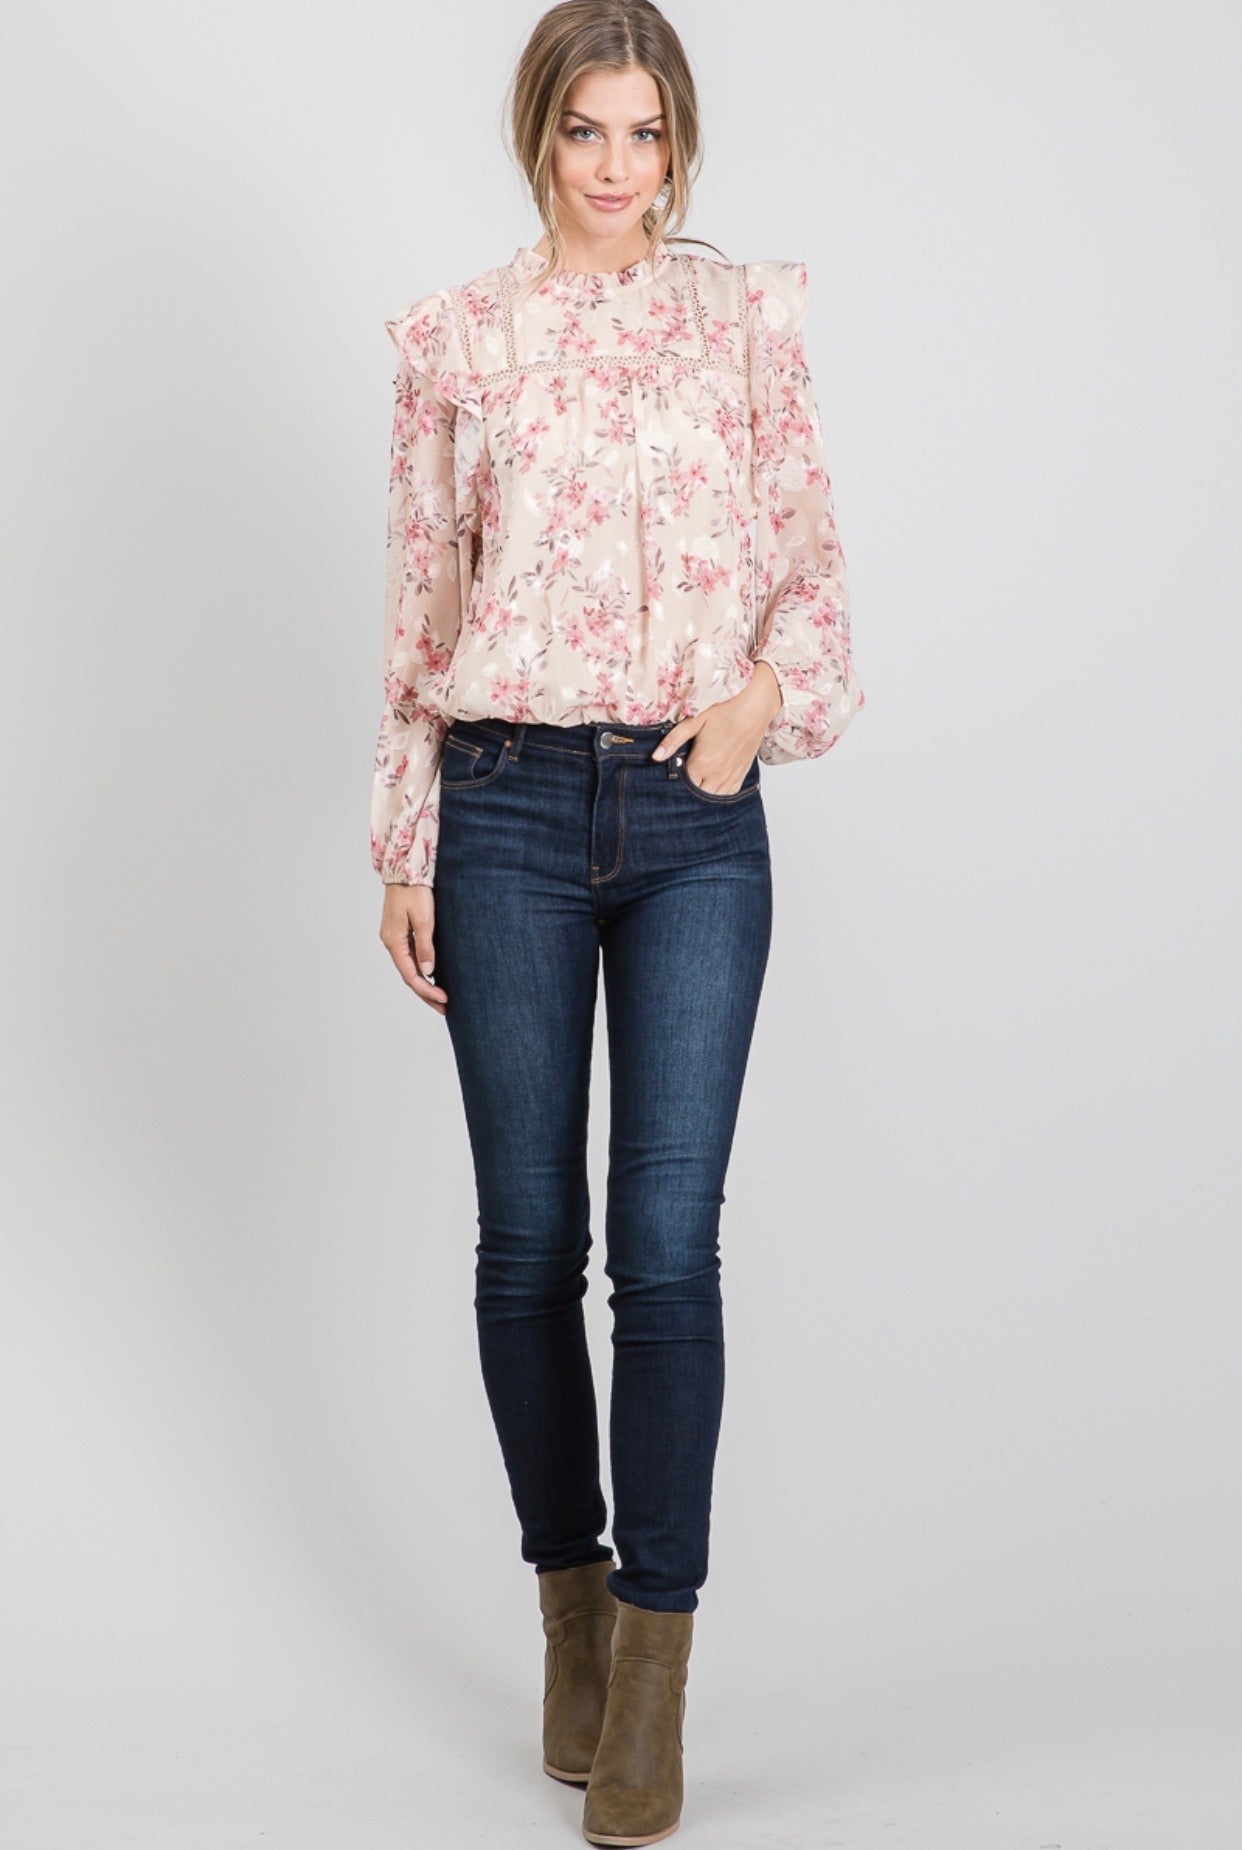 Cuffed Printed Blouse Bodysuit with Trim Detail - Forever Western Boutique